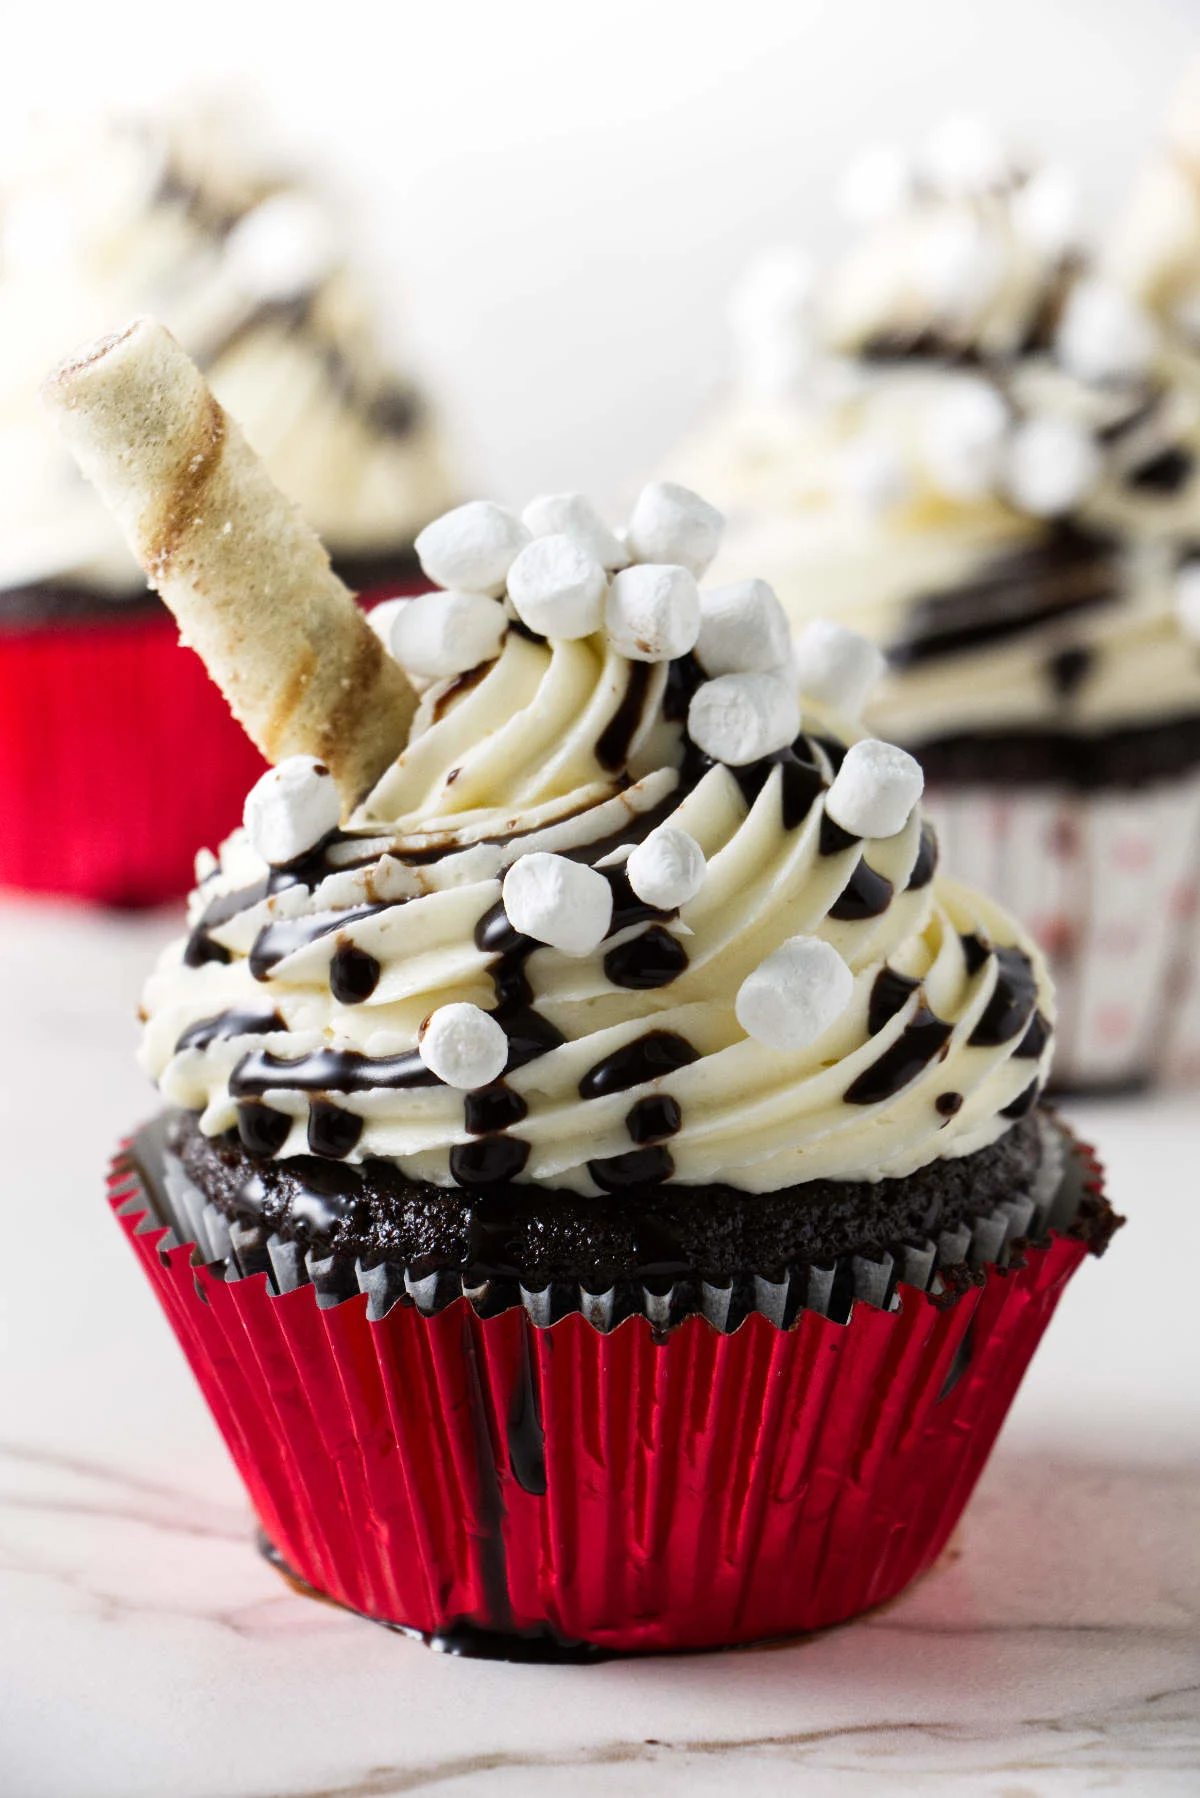 Boozy Chocolate Cupcakes with Baileys Buttercream Frosting - Bake Drizzle  Dust